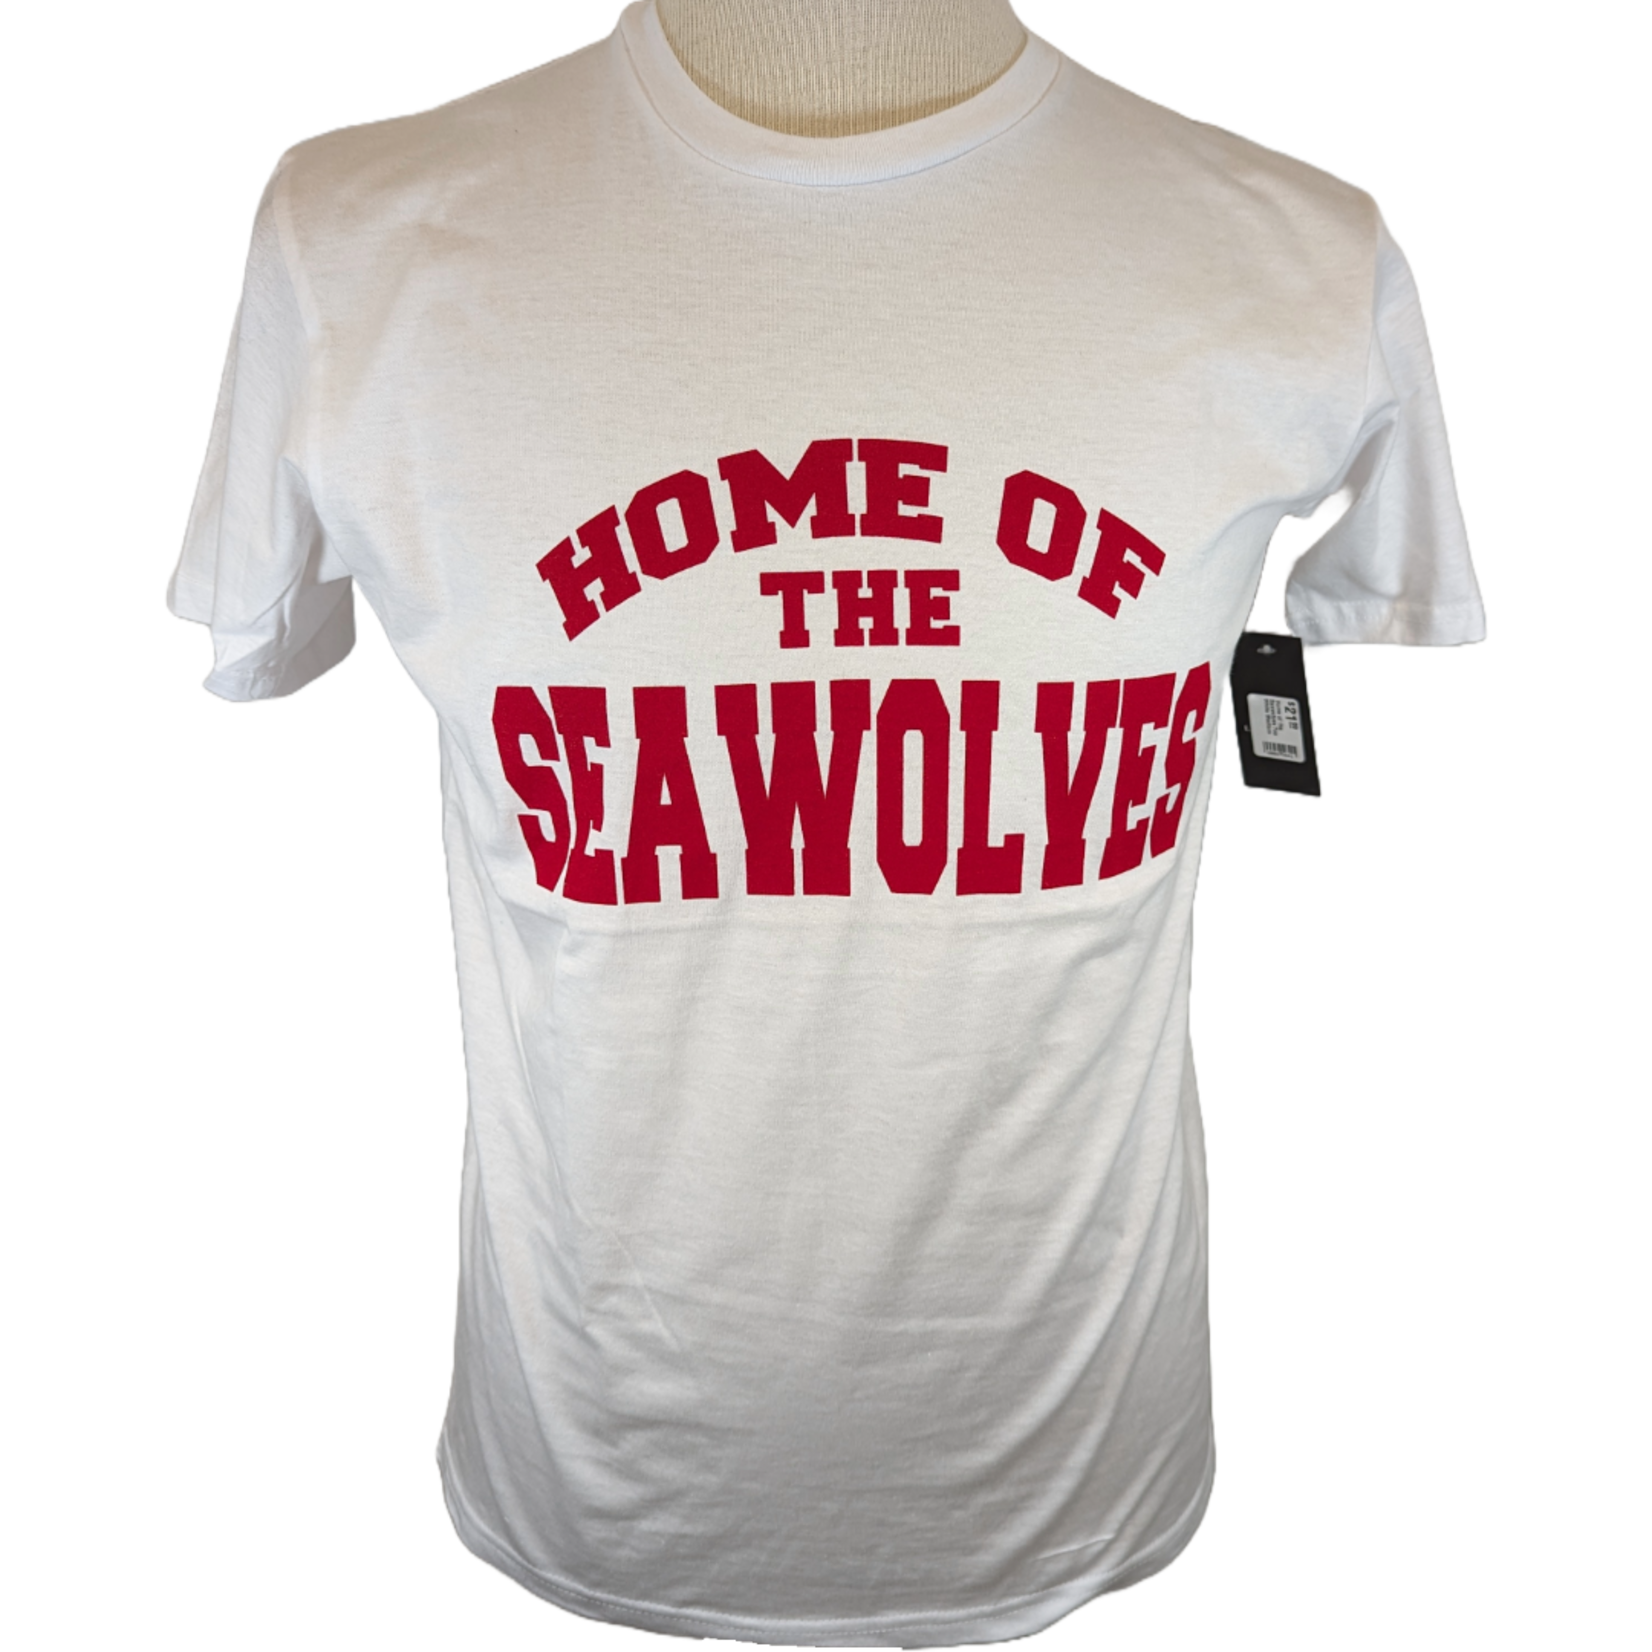 Home of the Seawolves Tee